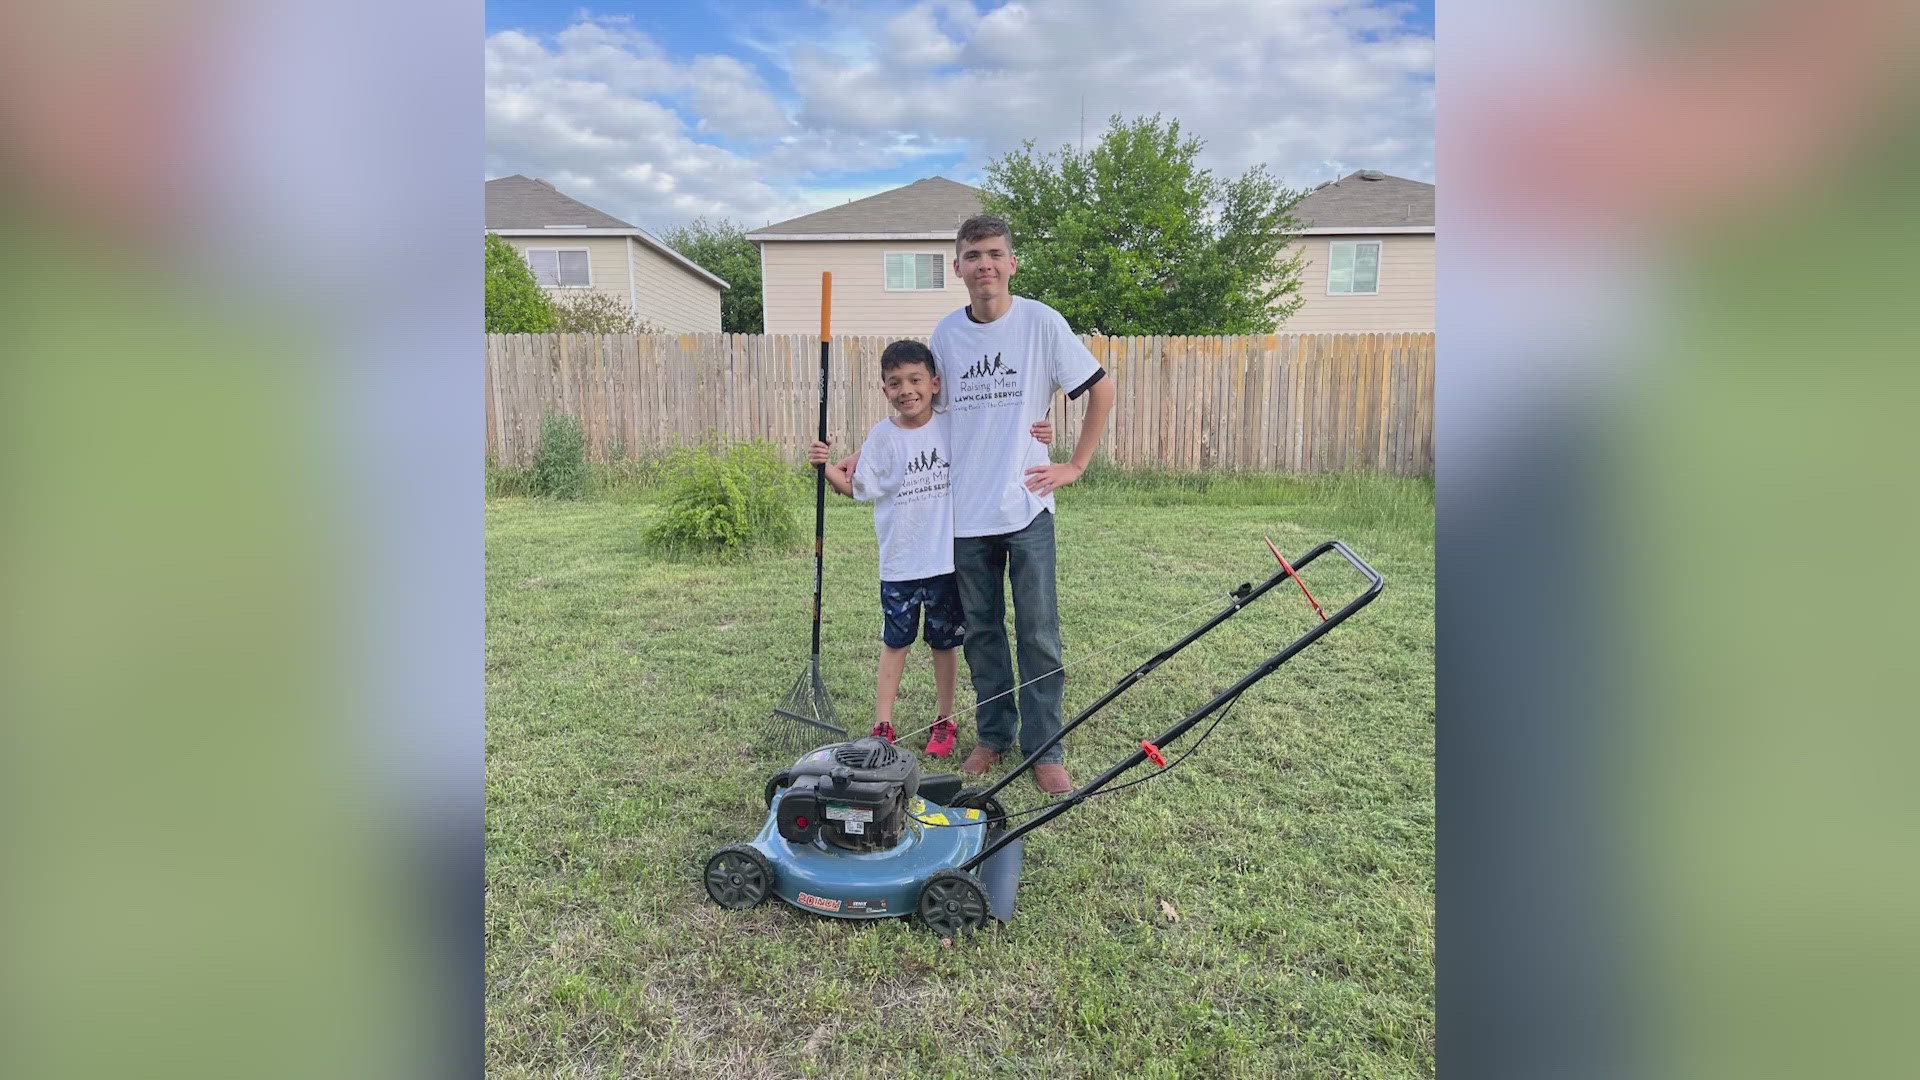 The brothers-turned-business partners have a goal to mow 50 lawns in San Antonio as a part of a challenge from Raising Men and Women Lawn Care Services.